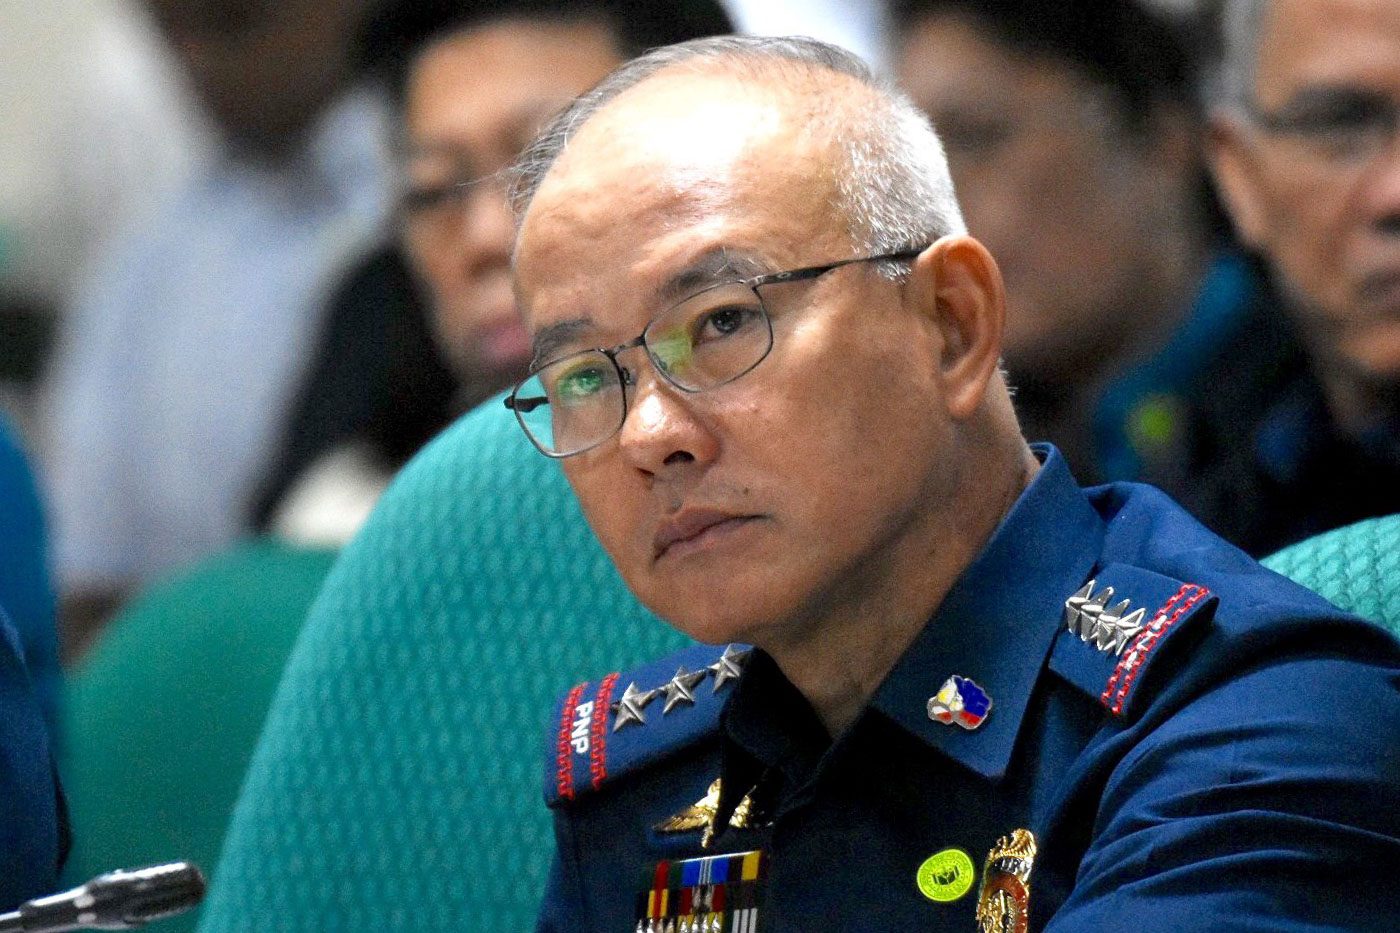 Over 1,600 minors nabbed for rape in 2 years – PNP